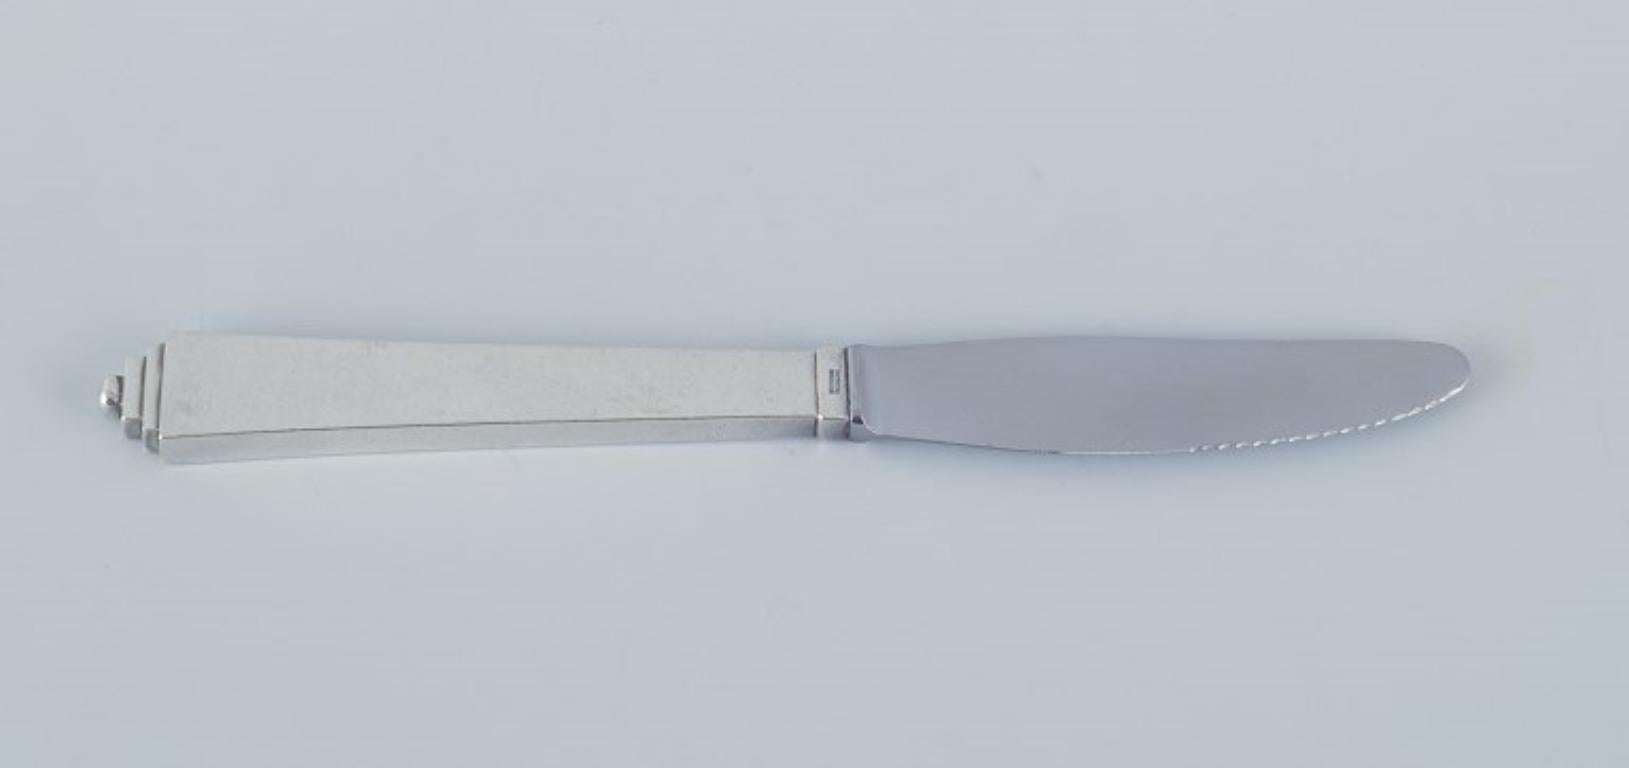 Georg Jensen Pyramid, a set of eight long-handled dinner knives in sterling silver and steel.
Hallmarked with post-1944 marks.
In excellent condition.
Dimensions: L 22.6 cm.